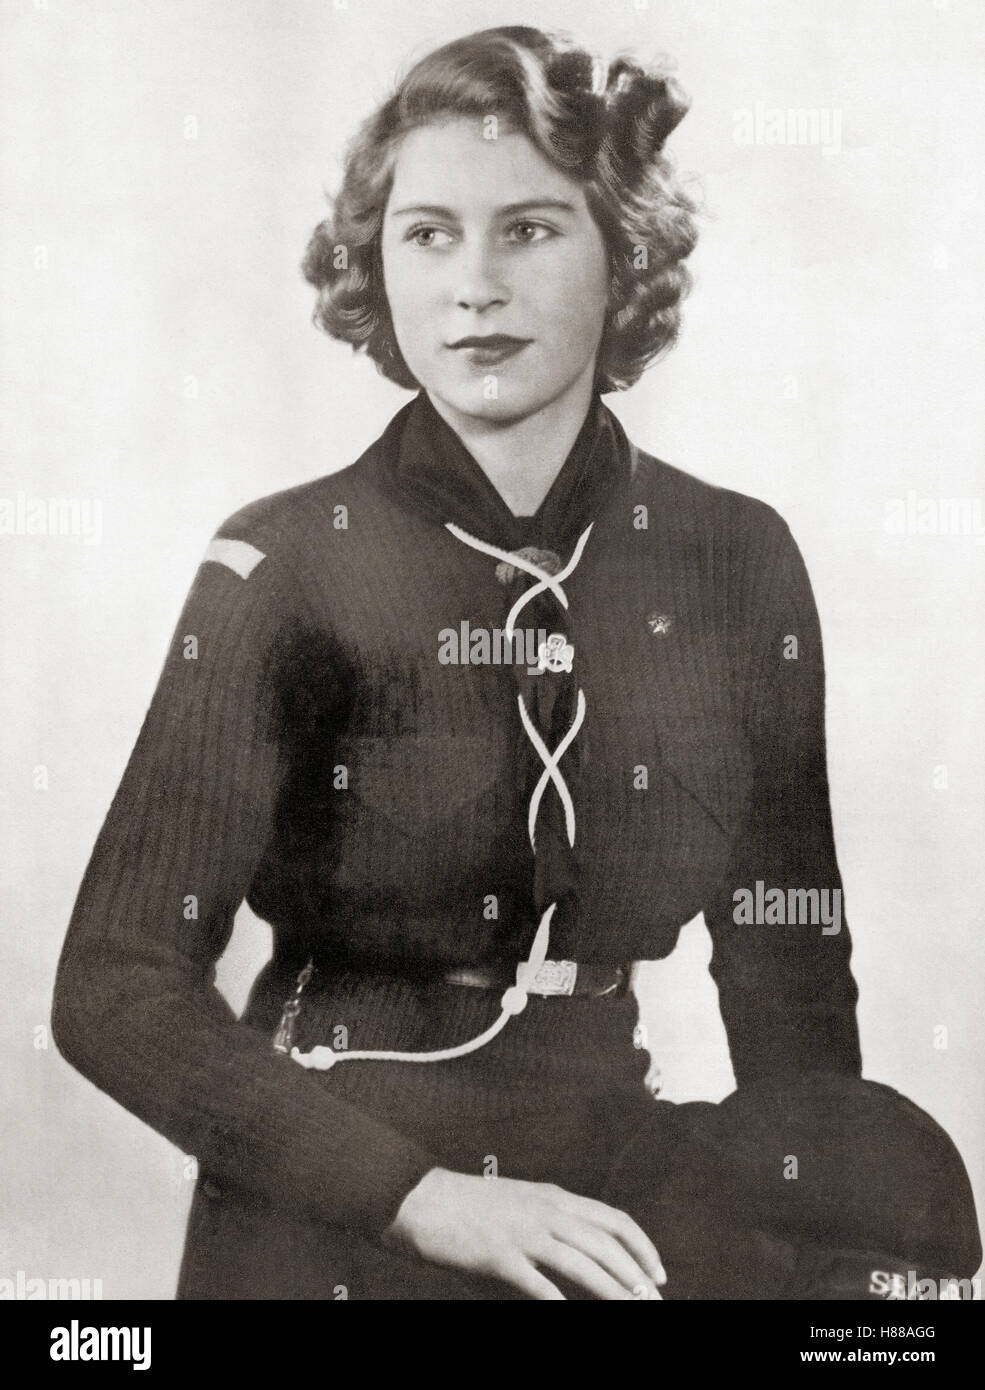 Princess Elizabeth, future Elizabeth II, 1926 - 2022.  Queen of the United Kingdom, Canada, Australia and New Zealand.  Seen here in 1943 dressed in a girl scout uniform.  From a photograph. Stock Photo